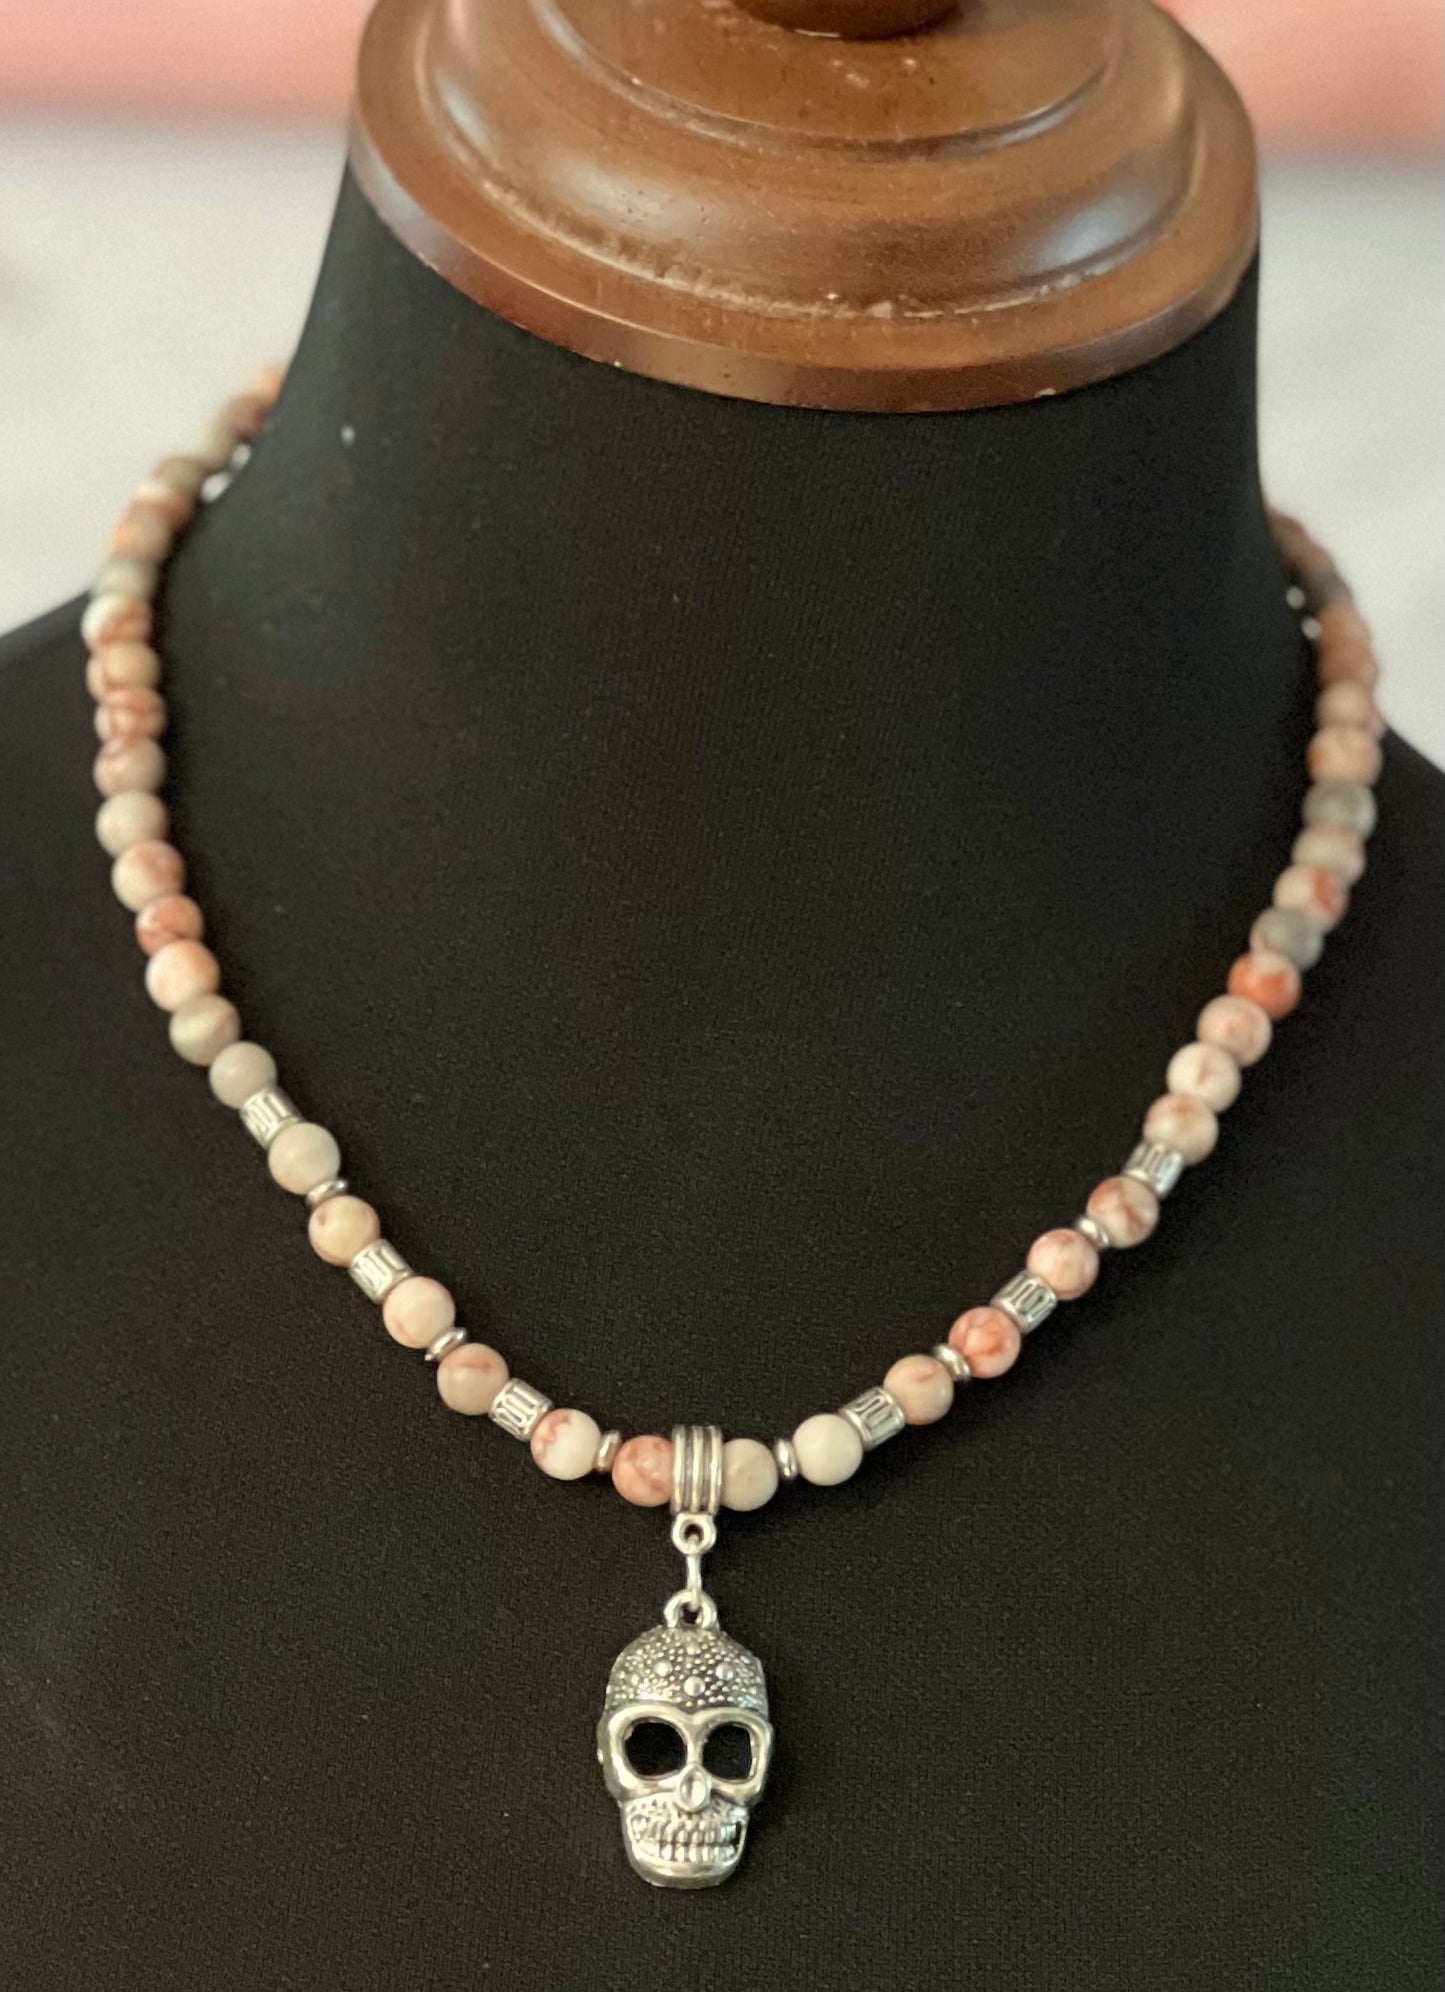 Mexican Inspired Skull Necklace with Natural Matte Veined Jasper Beads